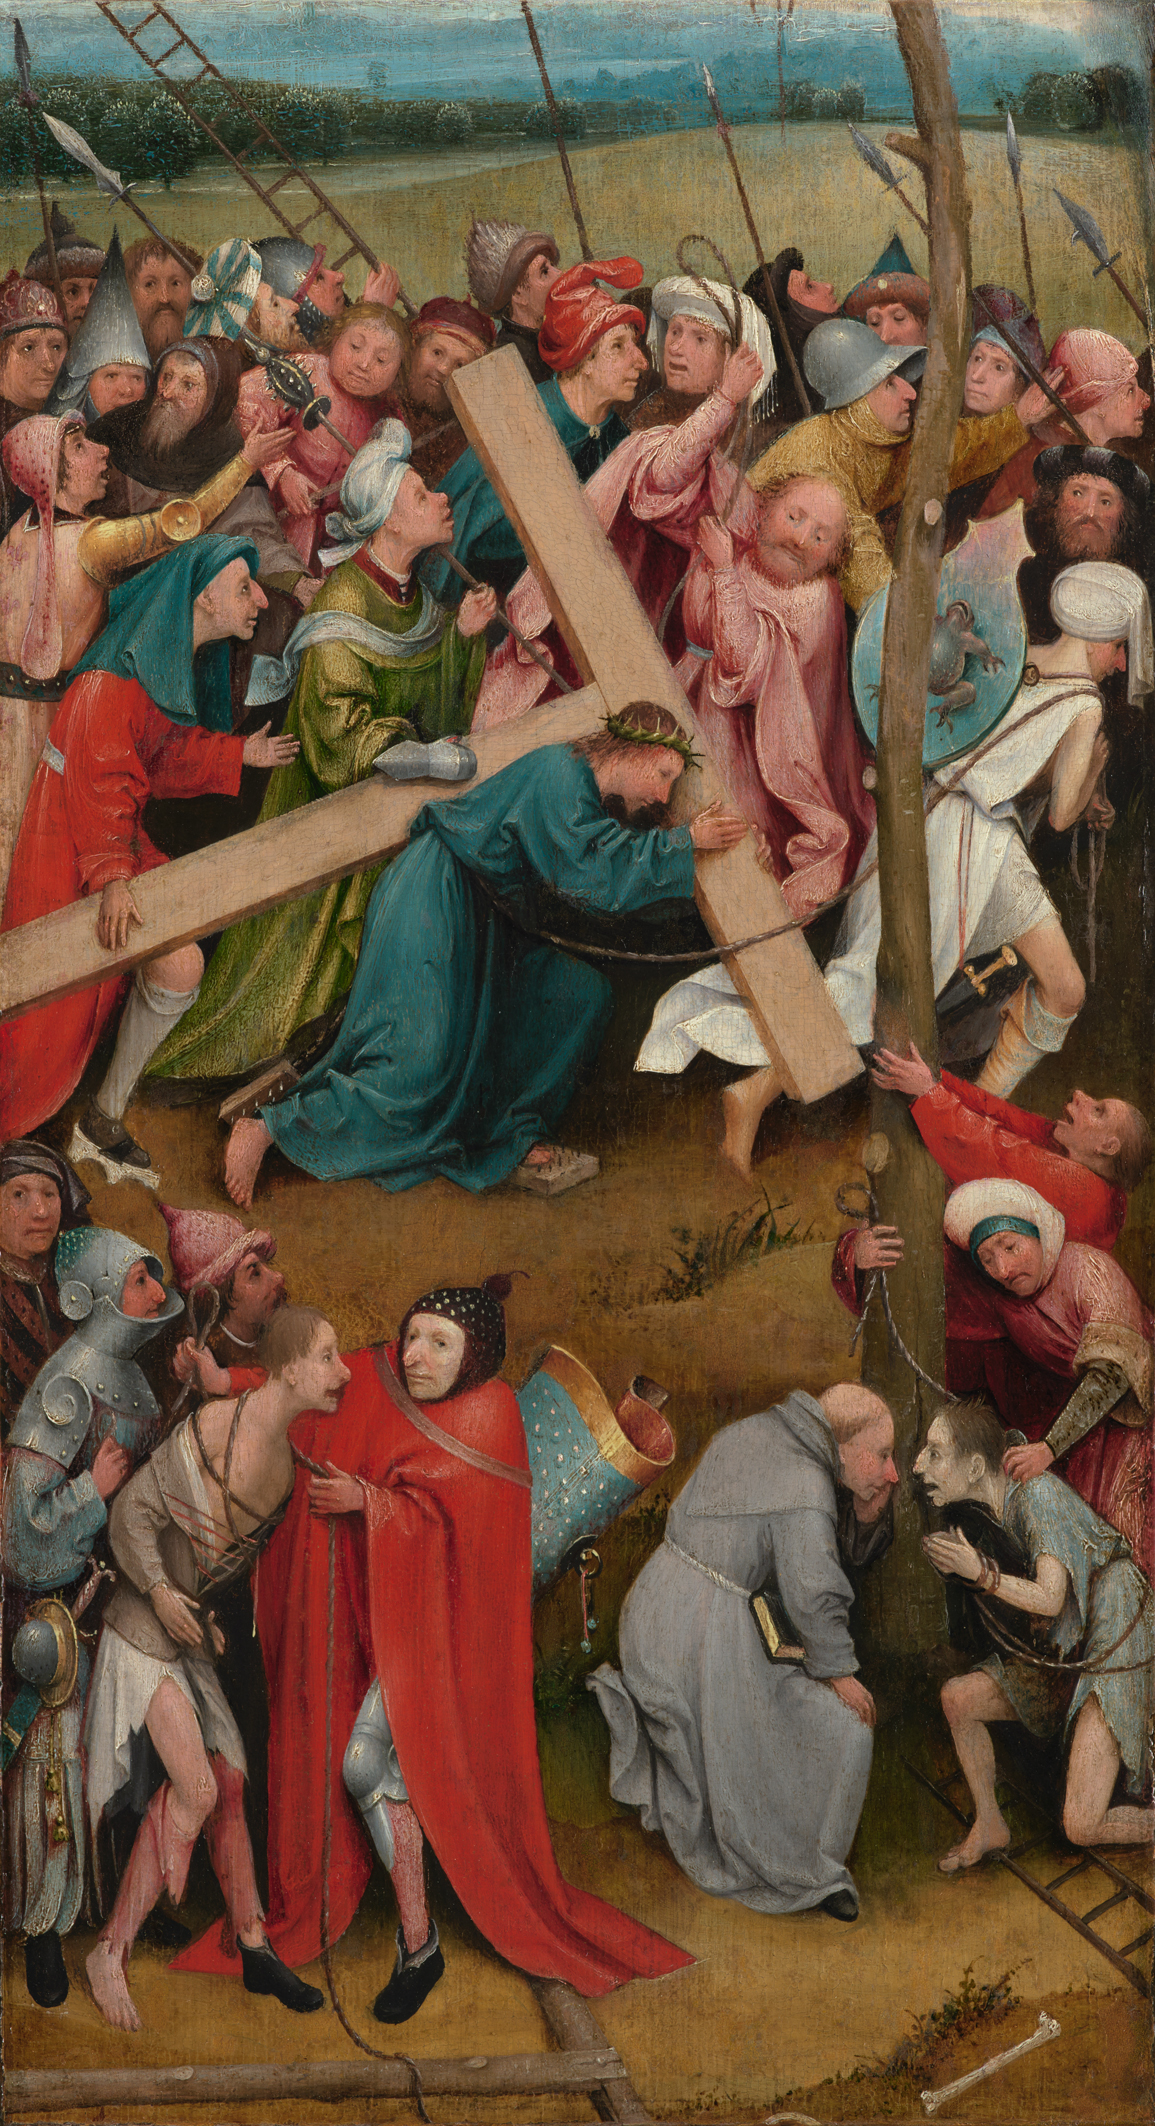 Christ Carrying the Cross by Hieronymus Bosch - 1480/90 - 57 cm × 32 cm Kunsthistorisches Museum